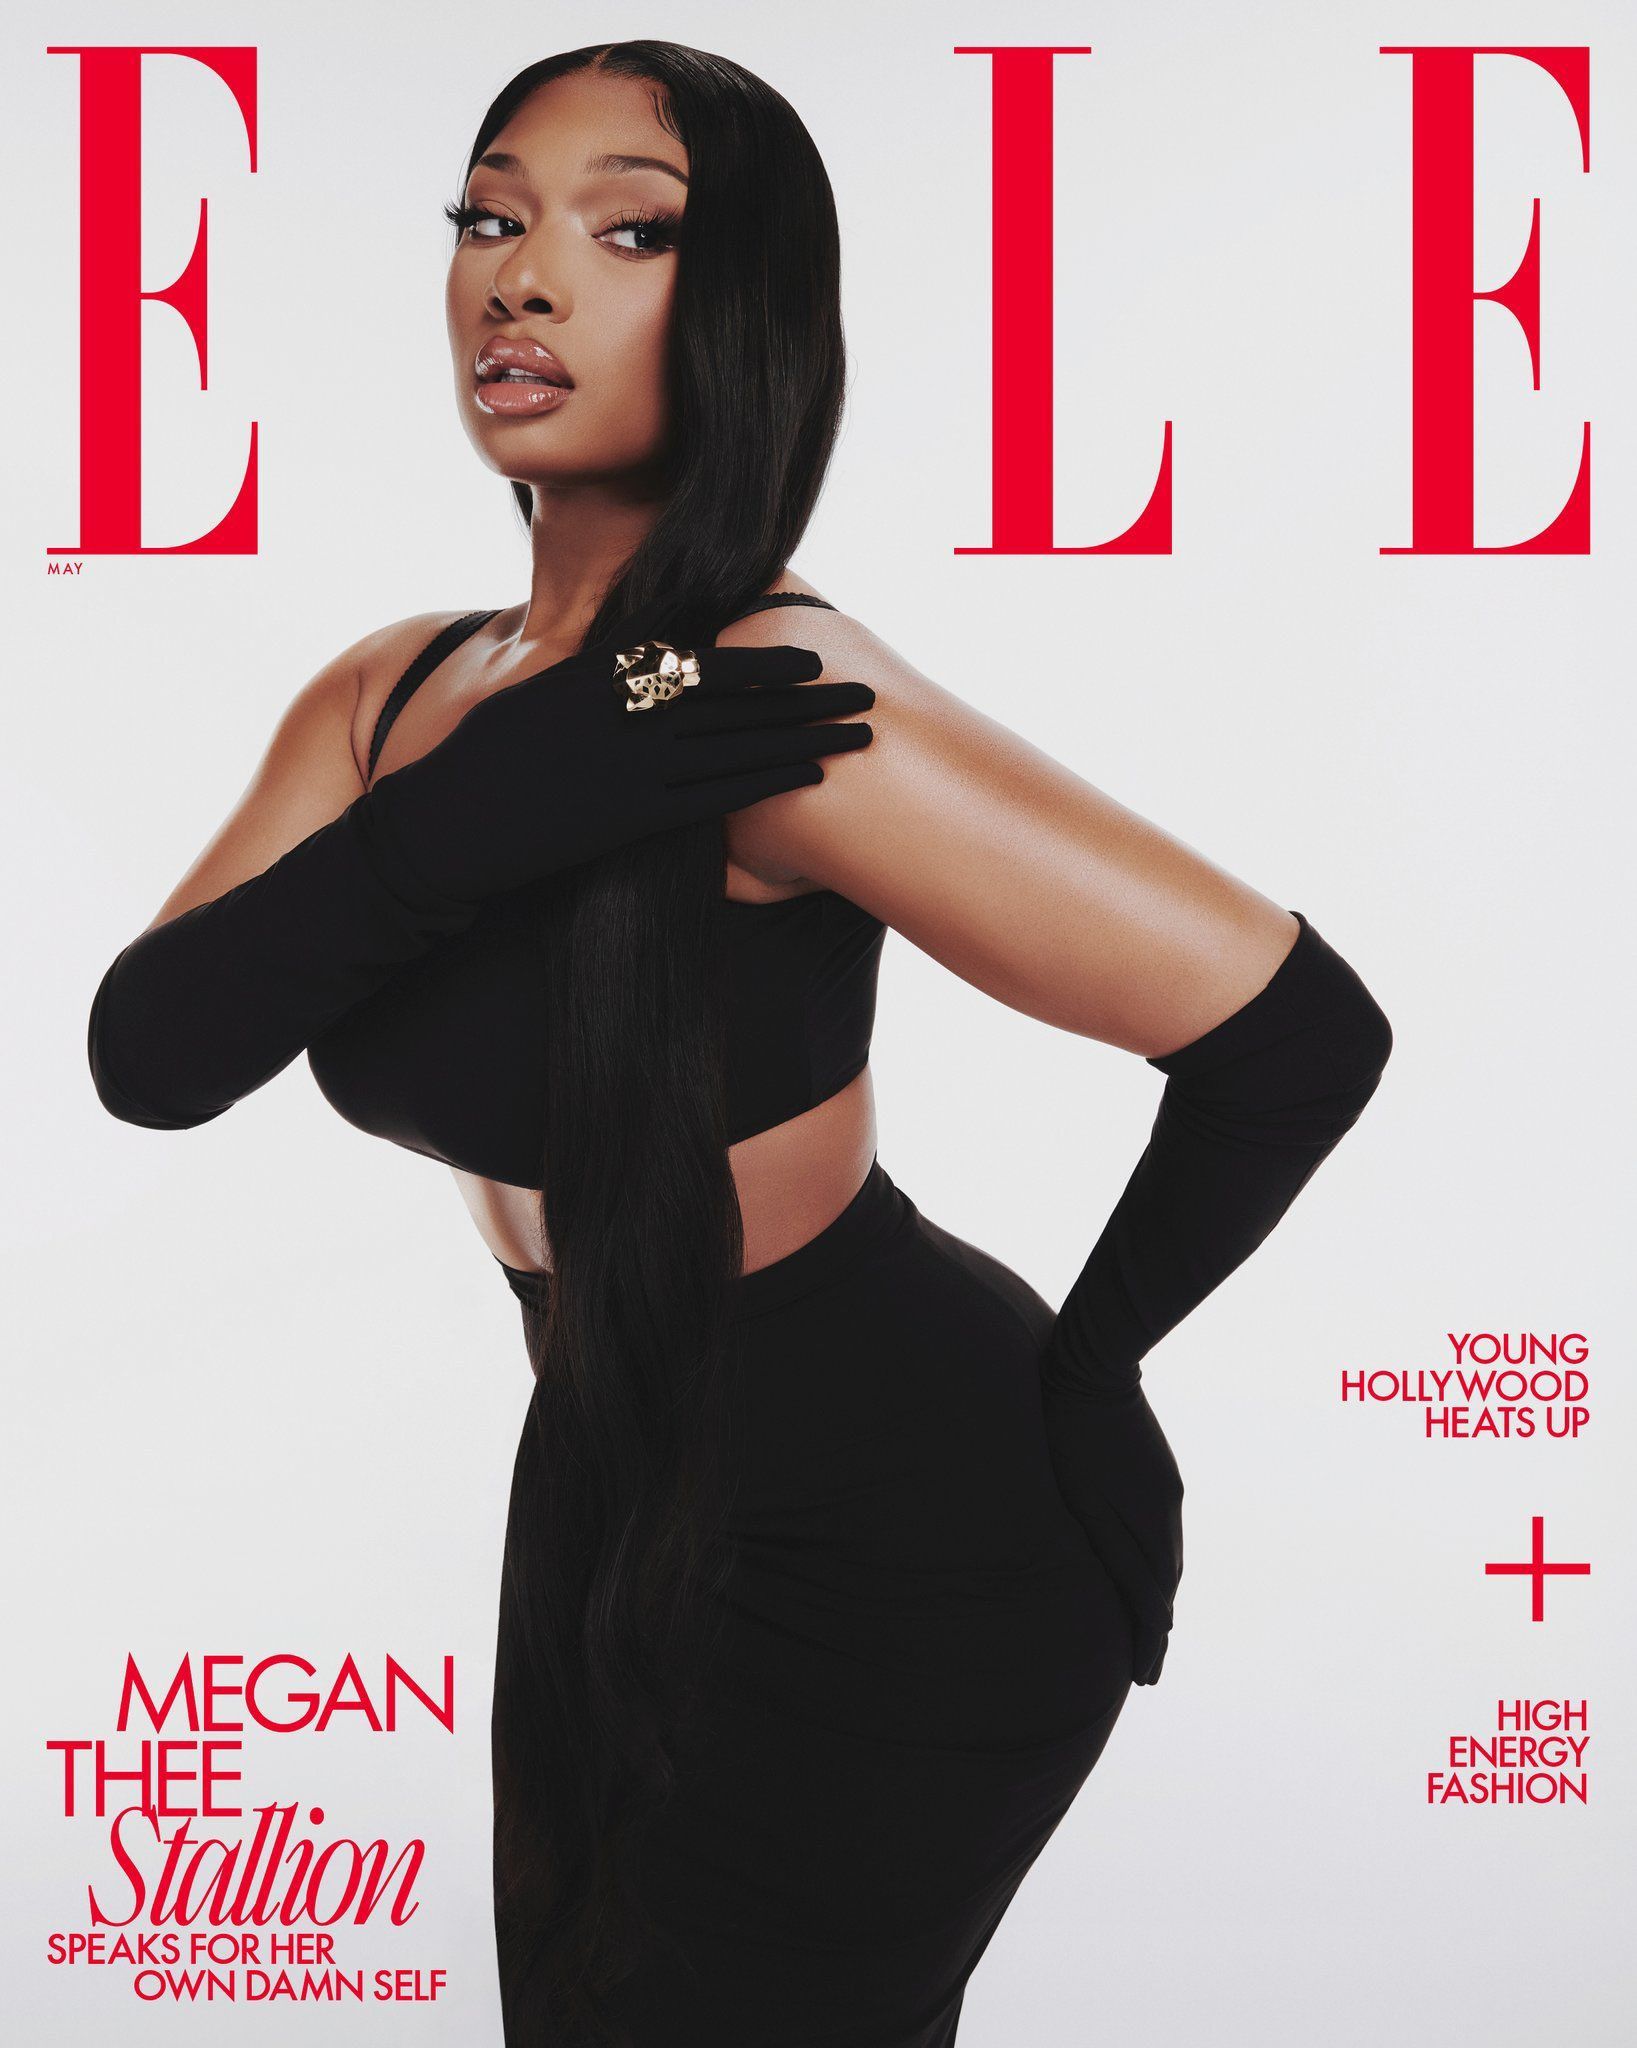 ‘Nobody Can Take Your Power’: Megan Thee Stallion in Her Own Words